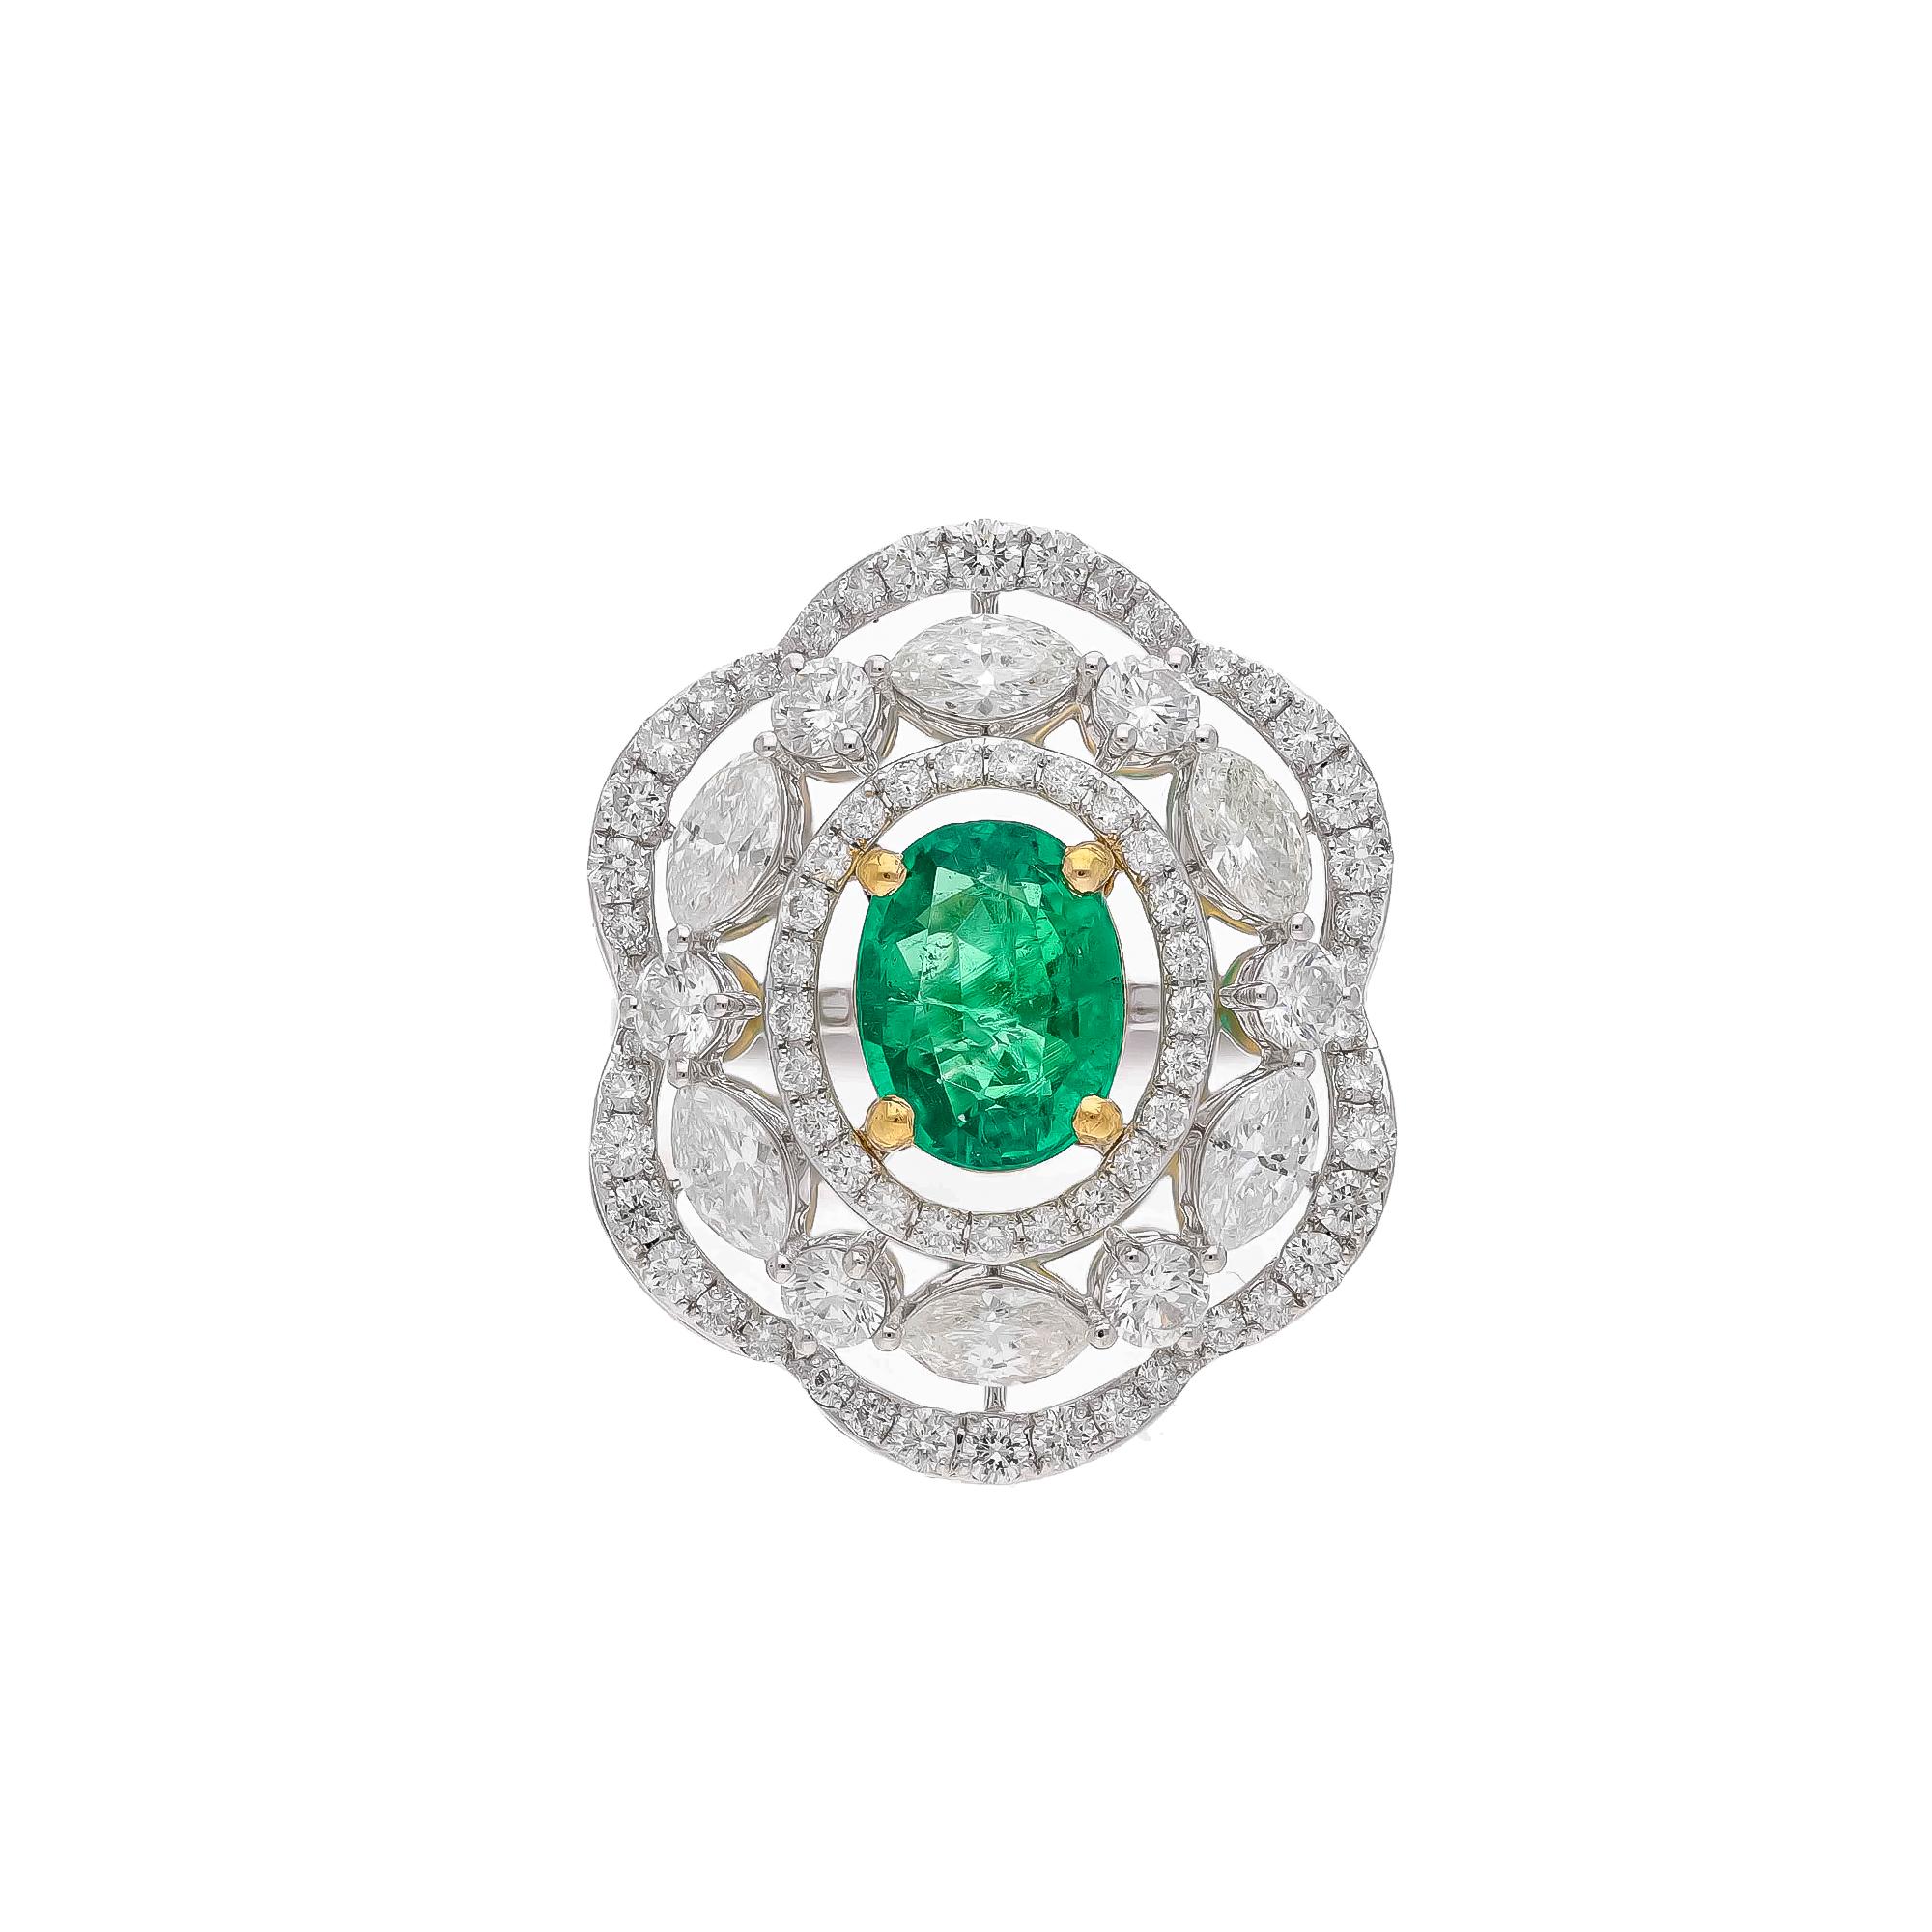 Diamonds : 2.54 carats
Emerald : 1.61 carats
Gold : 7.39 gm( 18k)

This is a beautiful natural columbian emerald ring with very high quality emeralds and diamonds ( vsi and G colour

Its very hard to capture the true color and luster of the stone, I